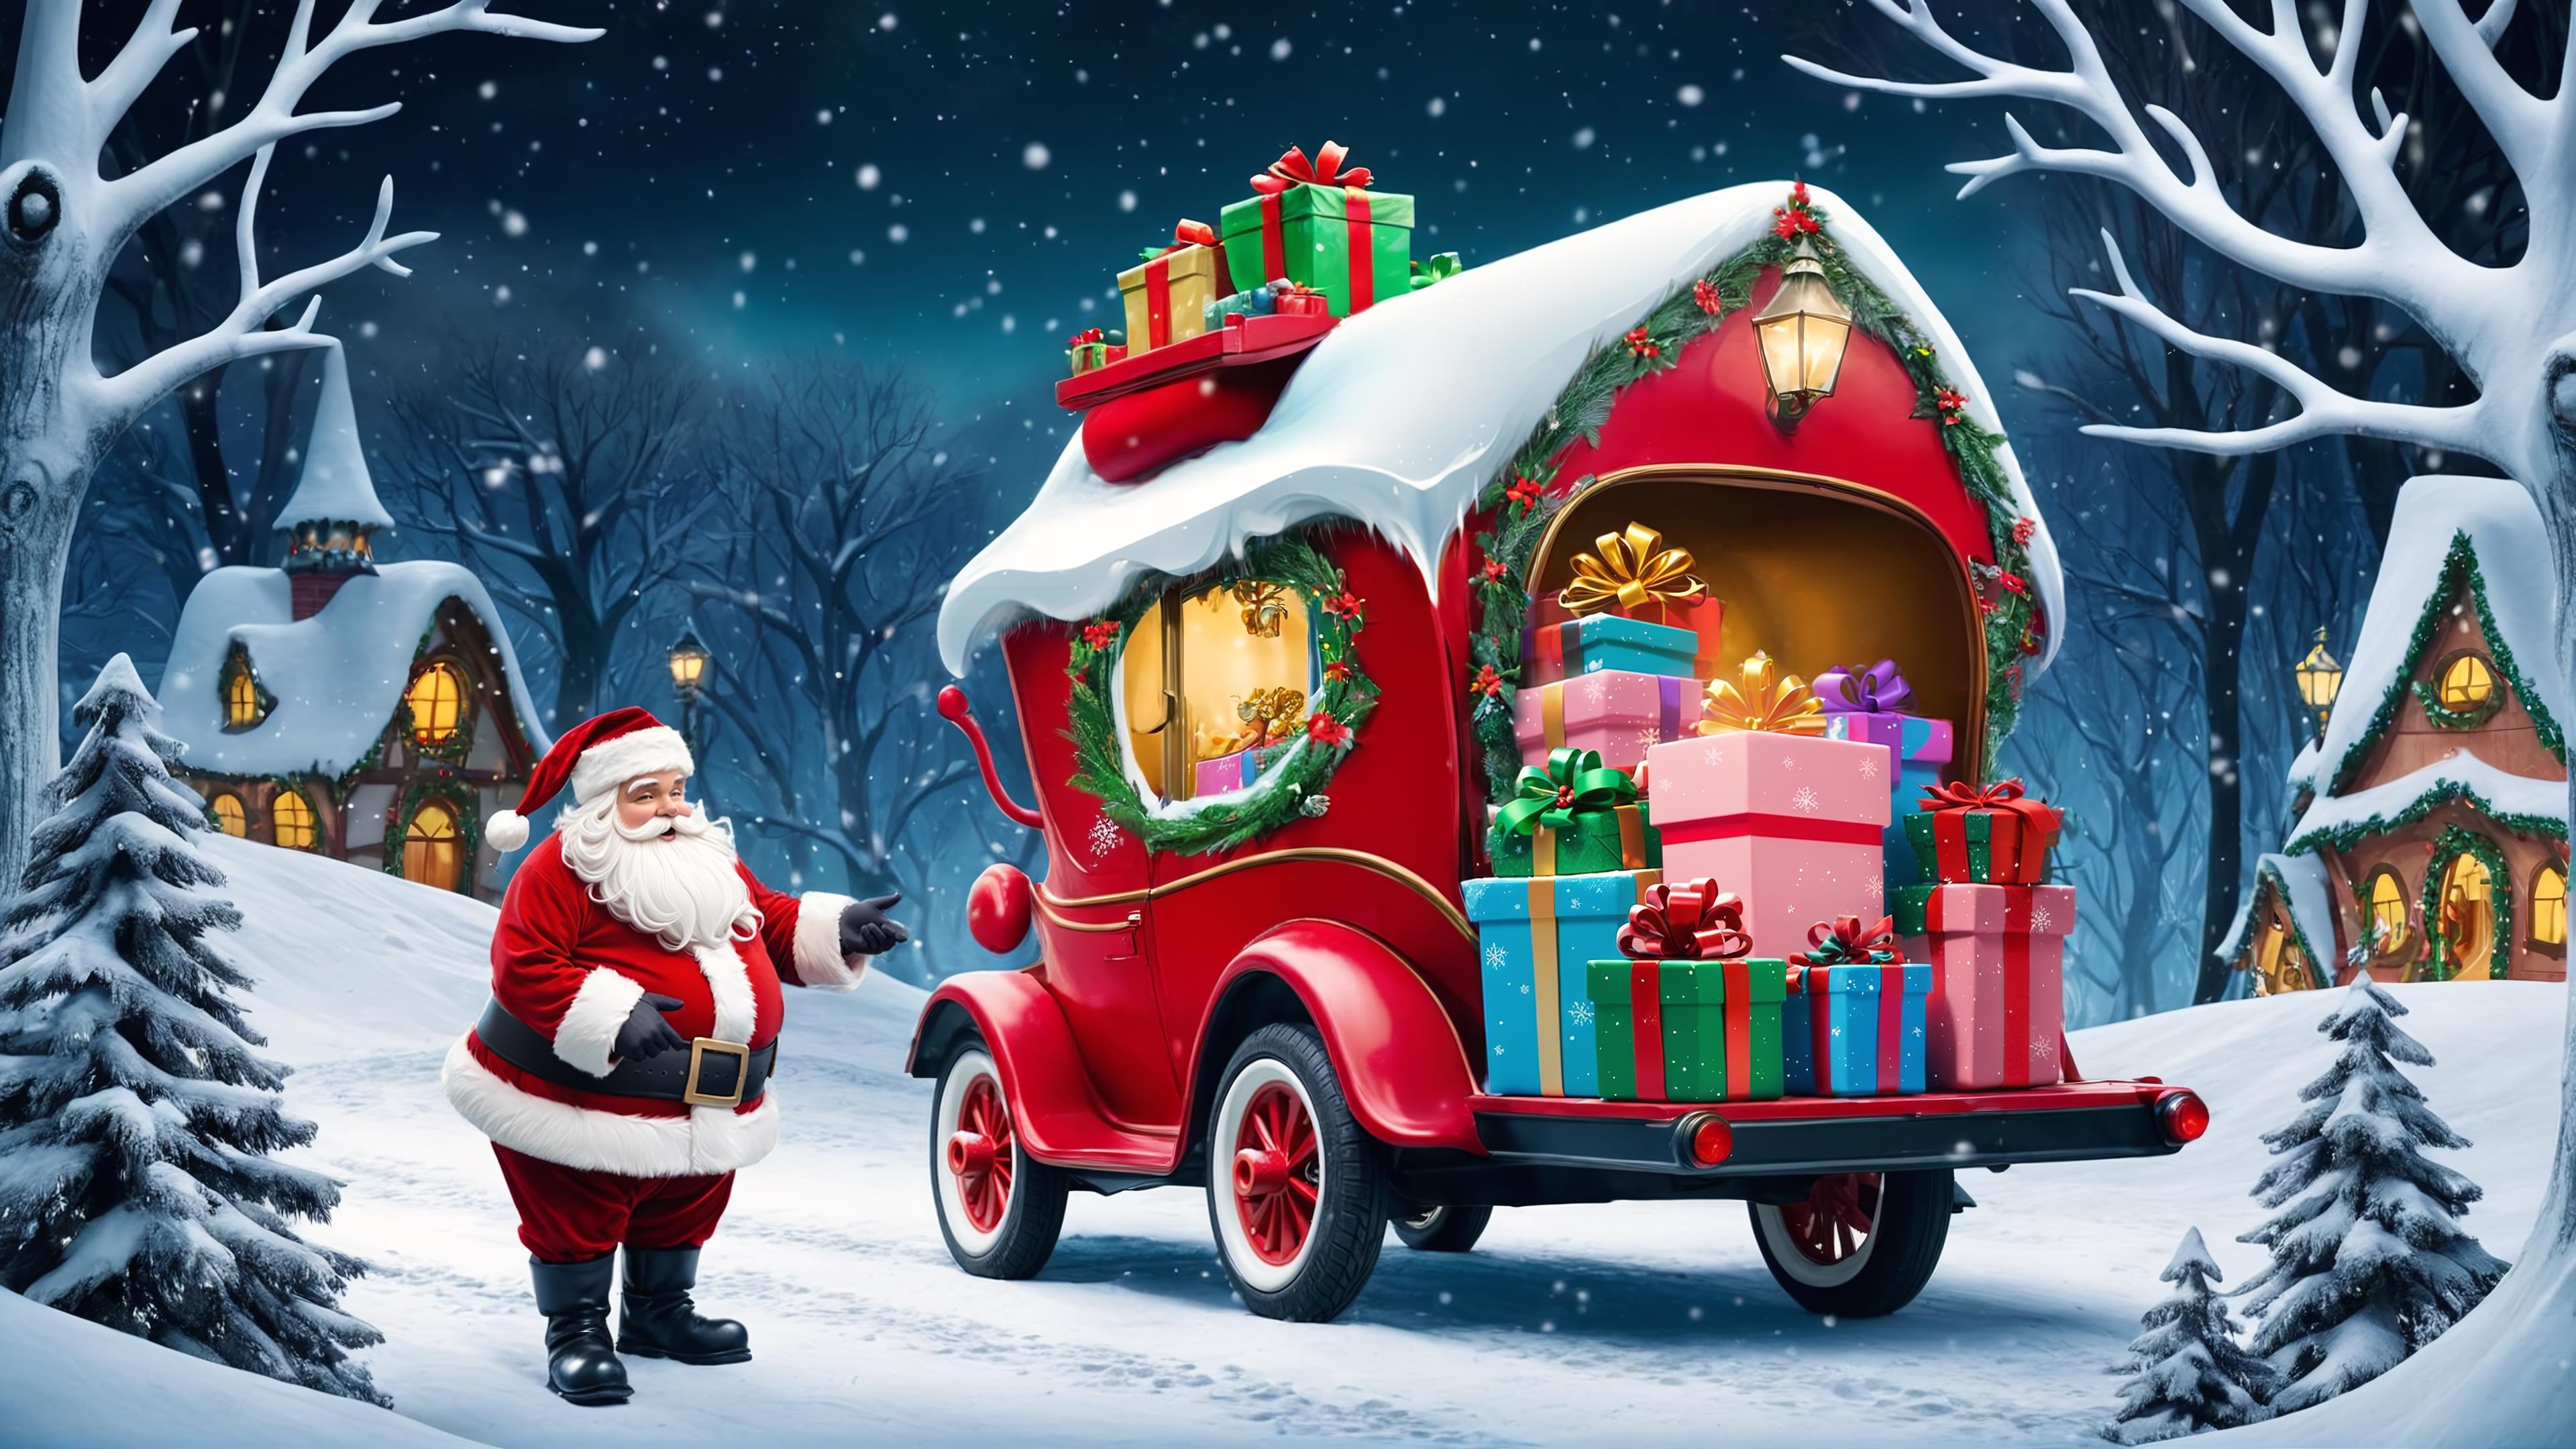 Santa Claus standing next to a red sleigh filled with presents and decorated with garland.